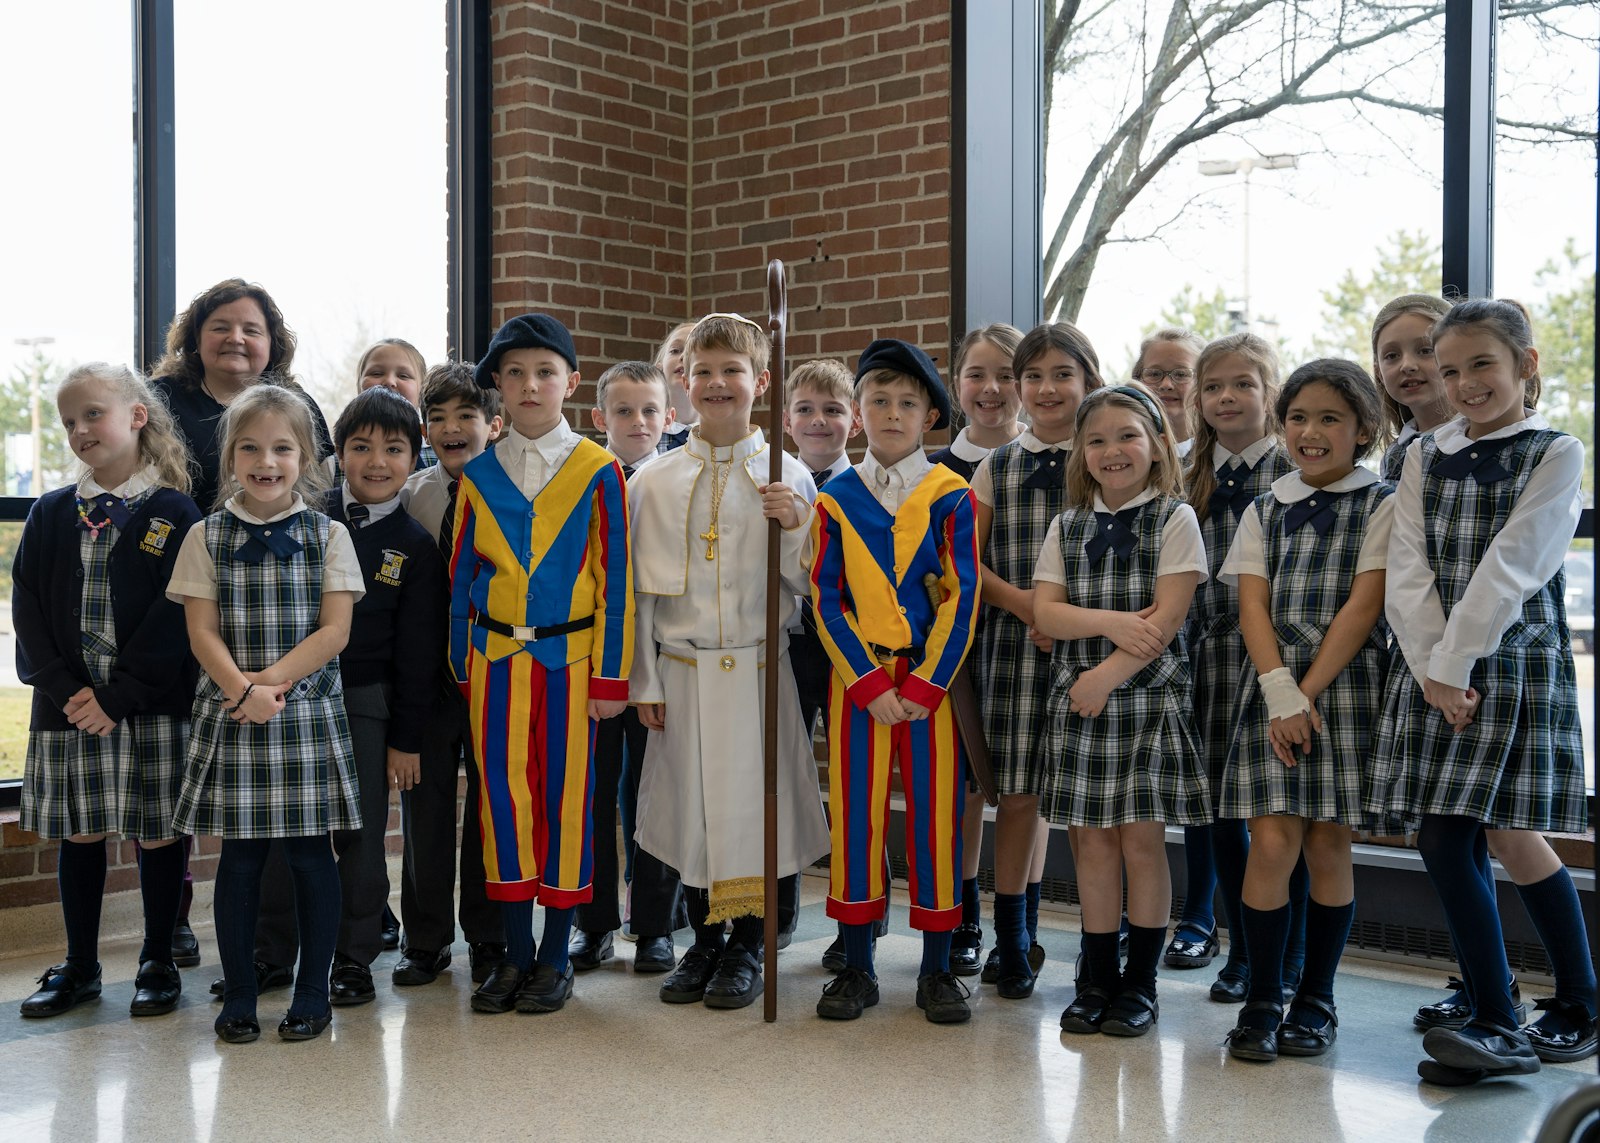 Michelle Wildrick poses with her second-grade class before the pope and his guards head over to the high school, driven by the headmaster in a makeshift popemobile.